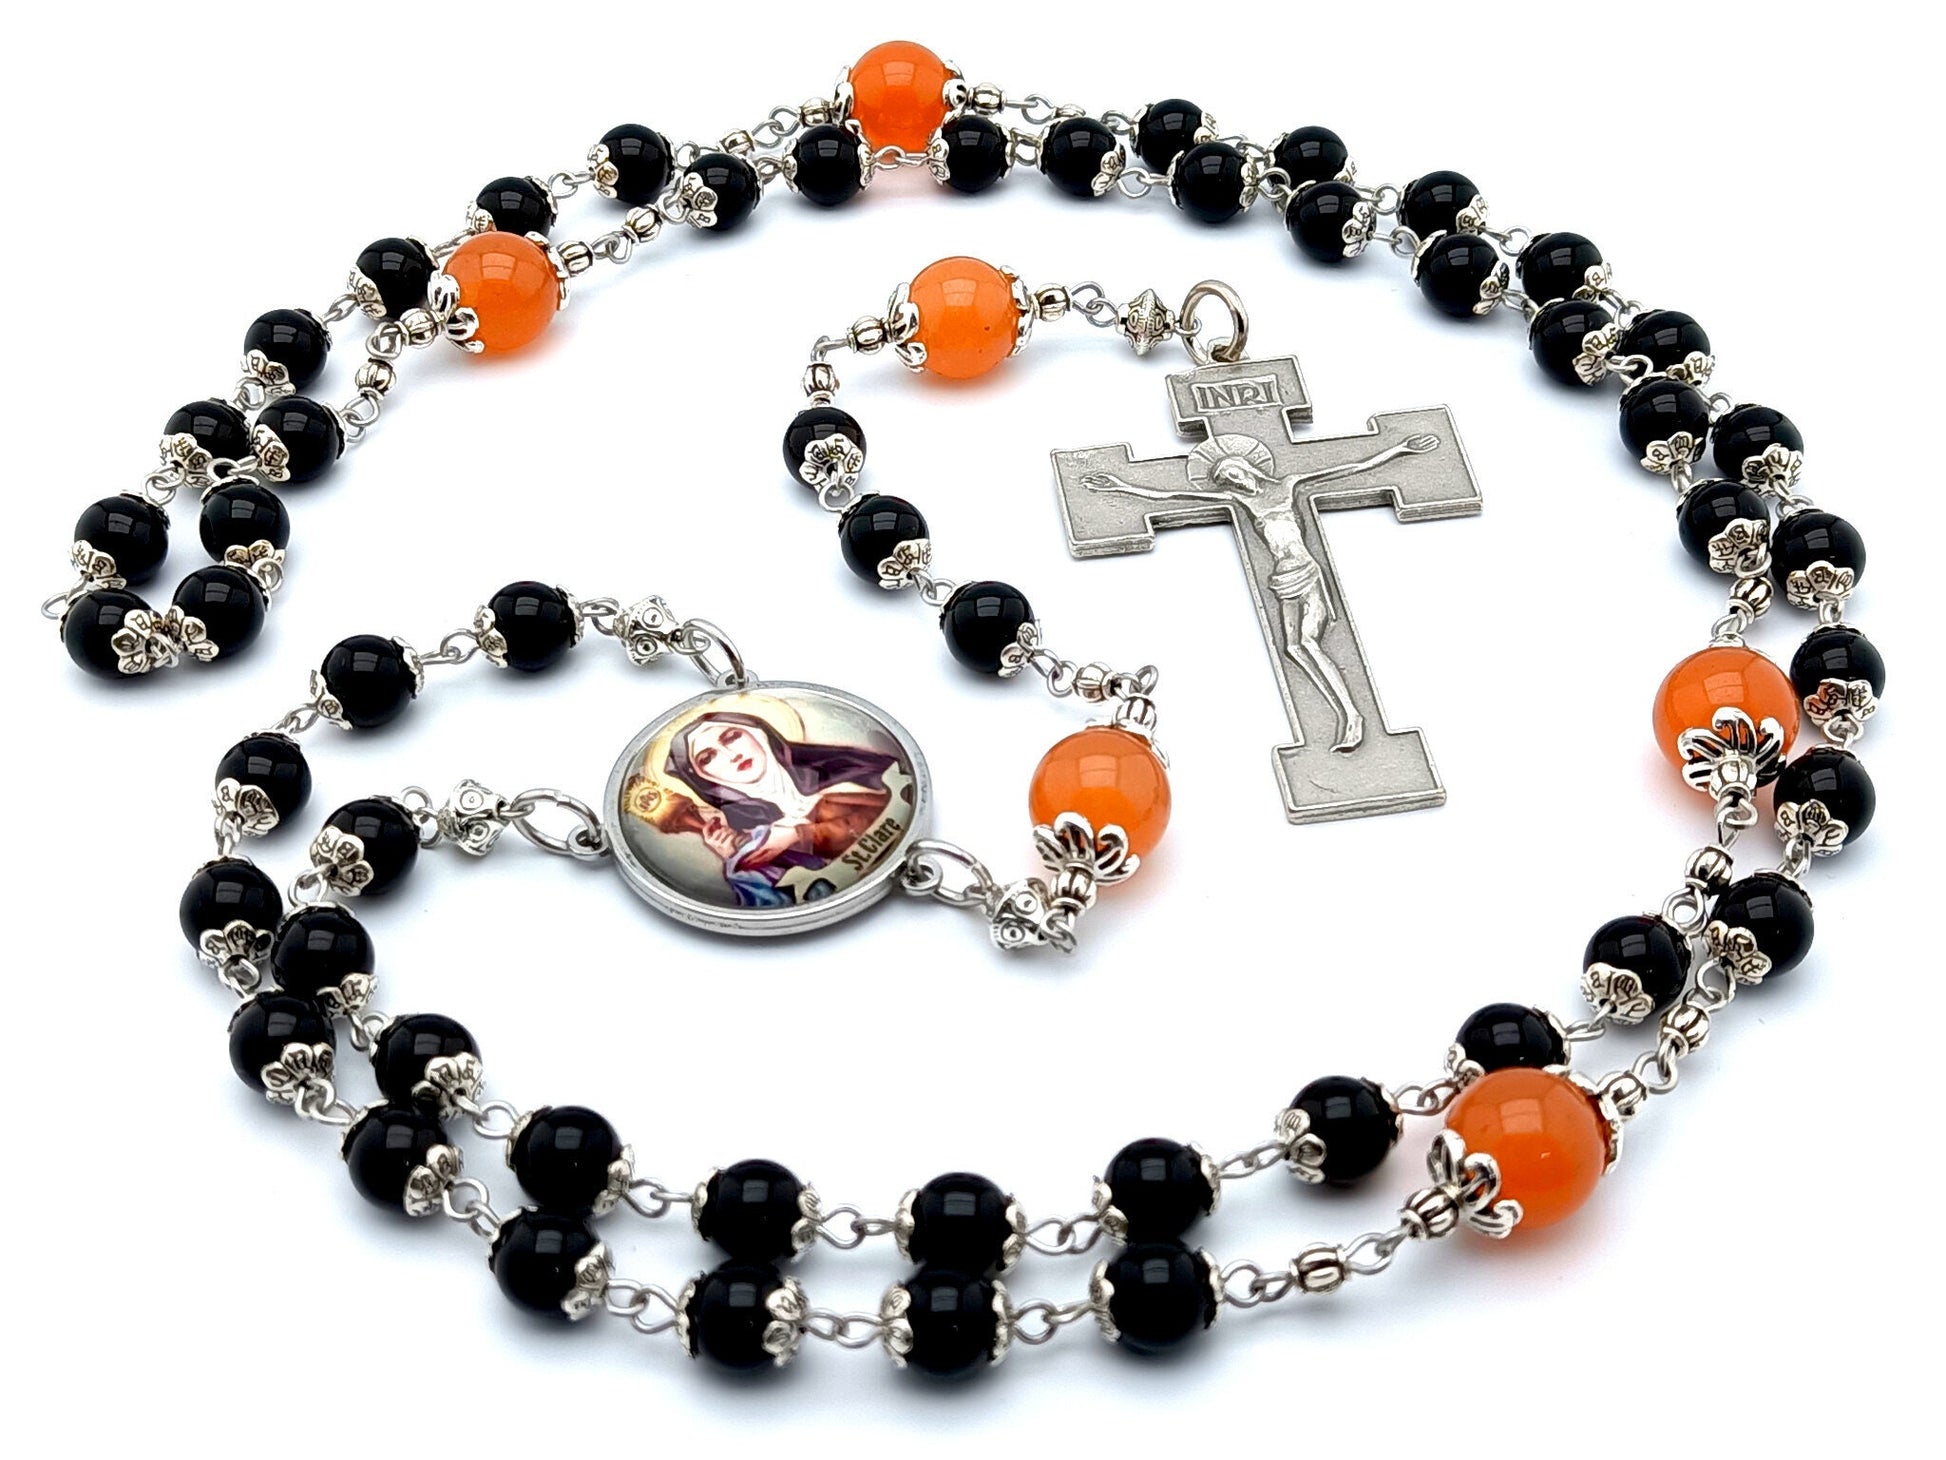 Saint Clare unique rosary beads with black onyx and tangerine gemstone beads, silver crucifix and picture centre medal.